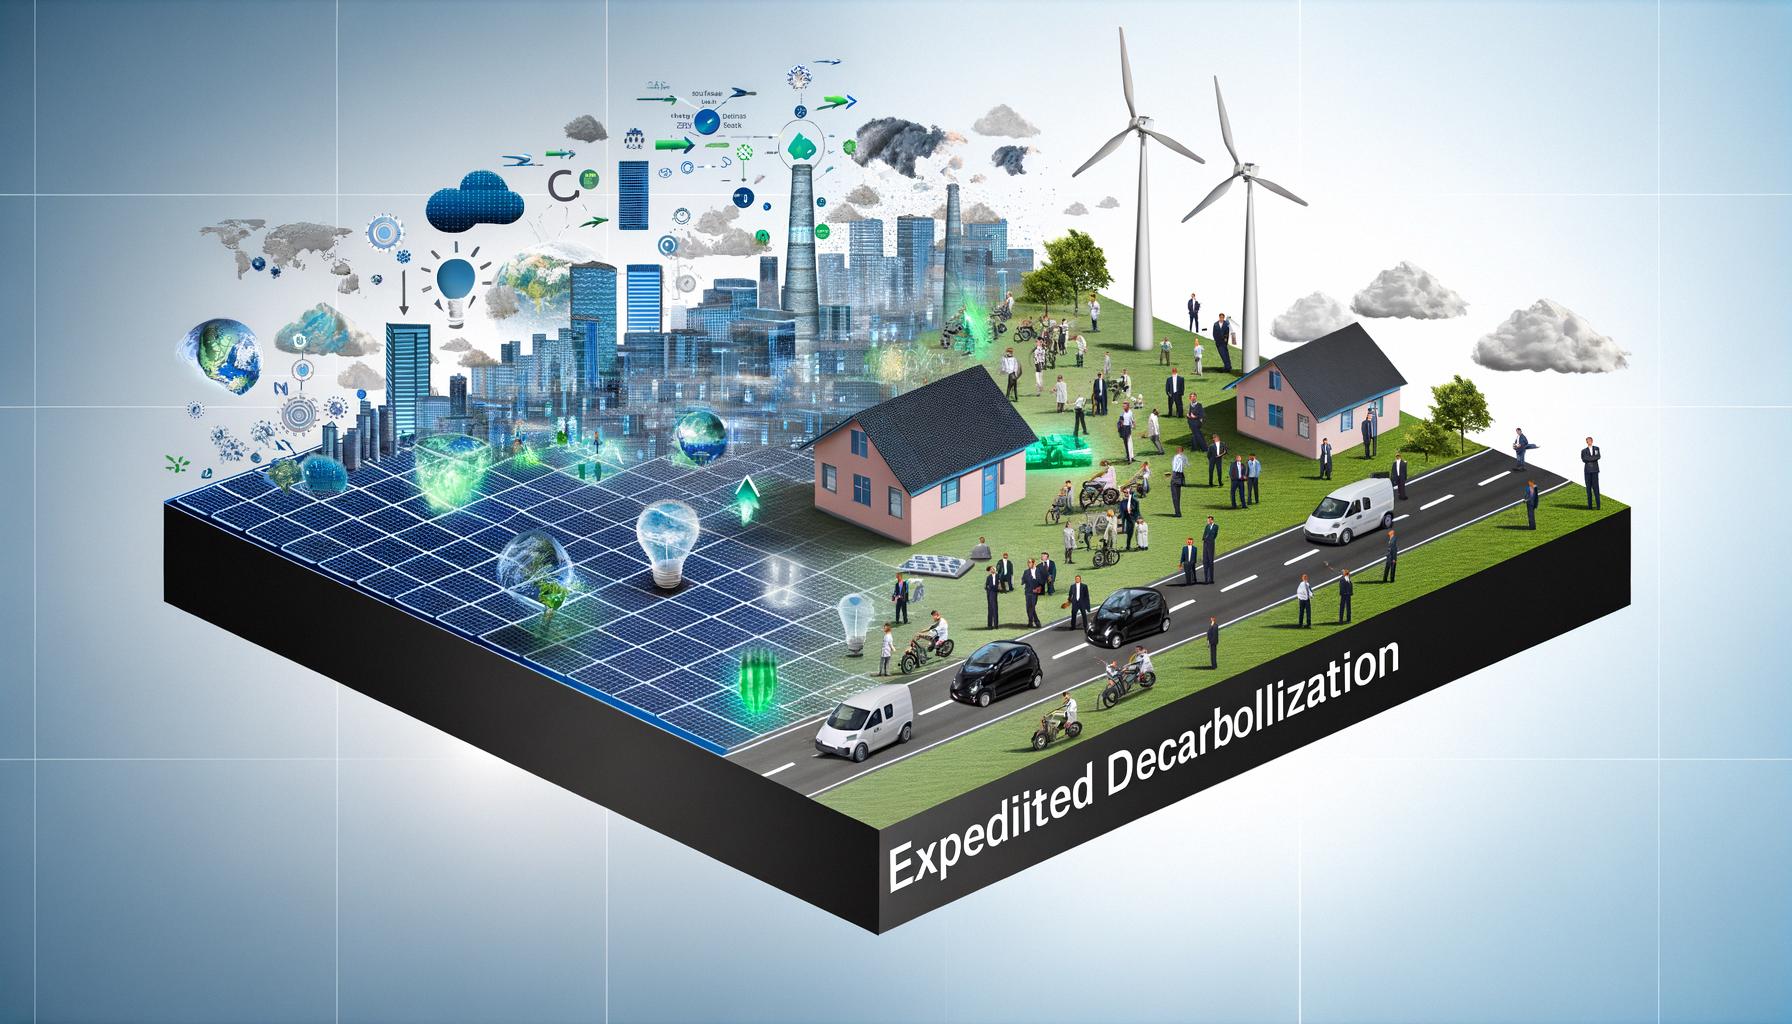 Technological and collaborative efforts are accelerating decarbonization across various sectors globally.